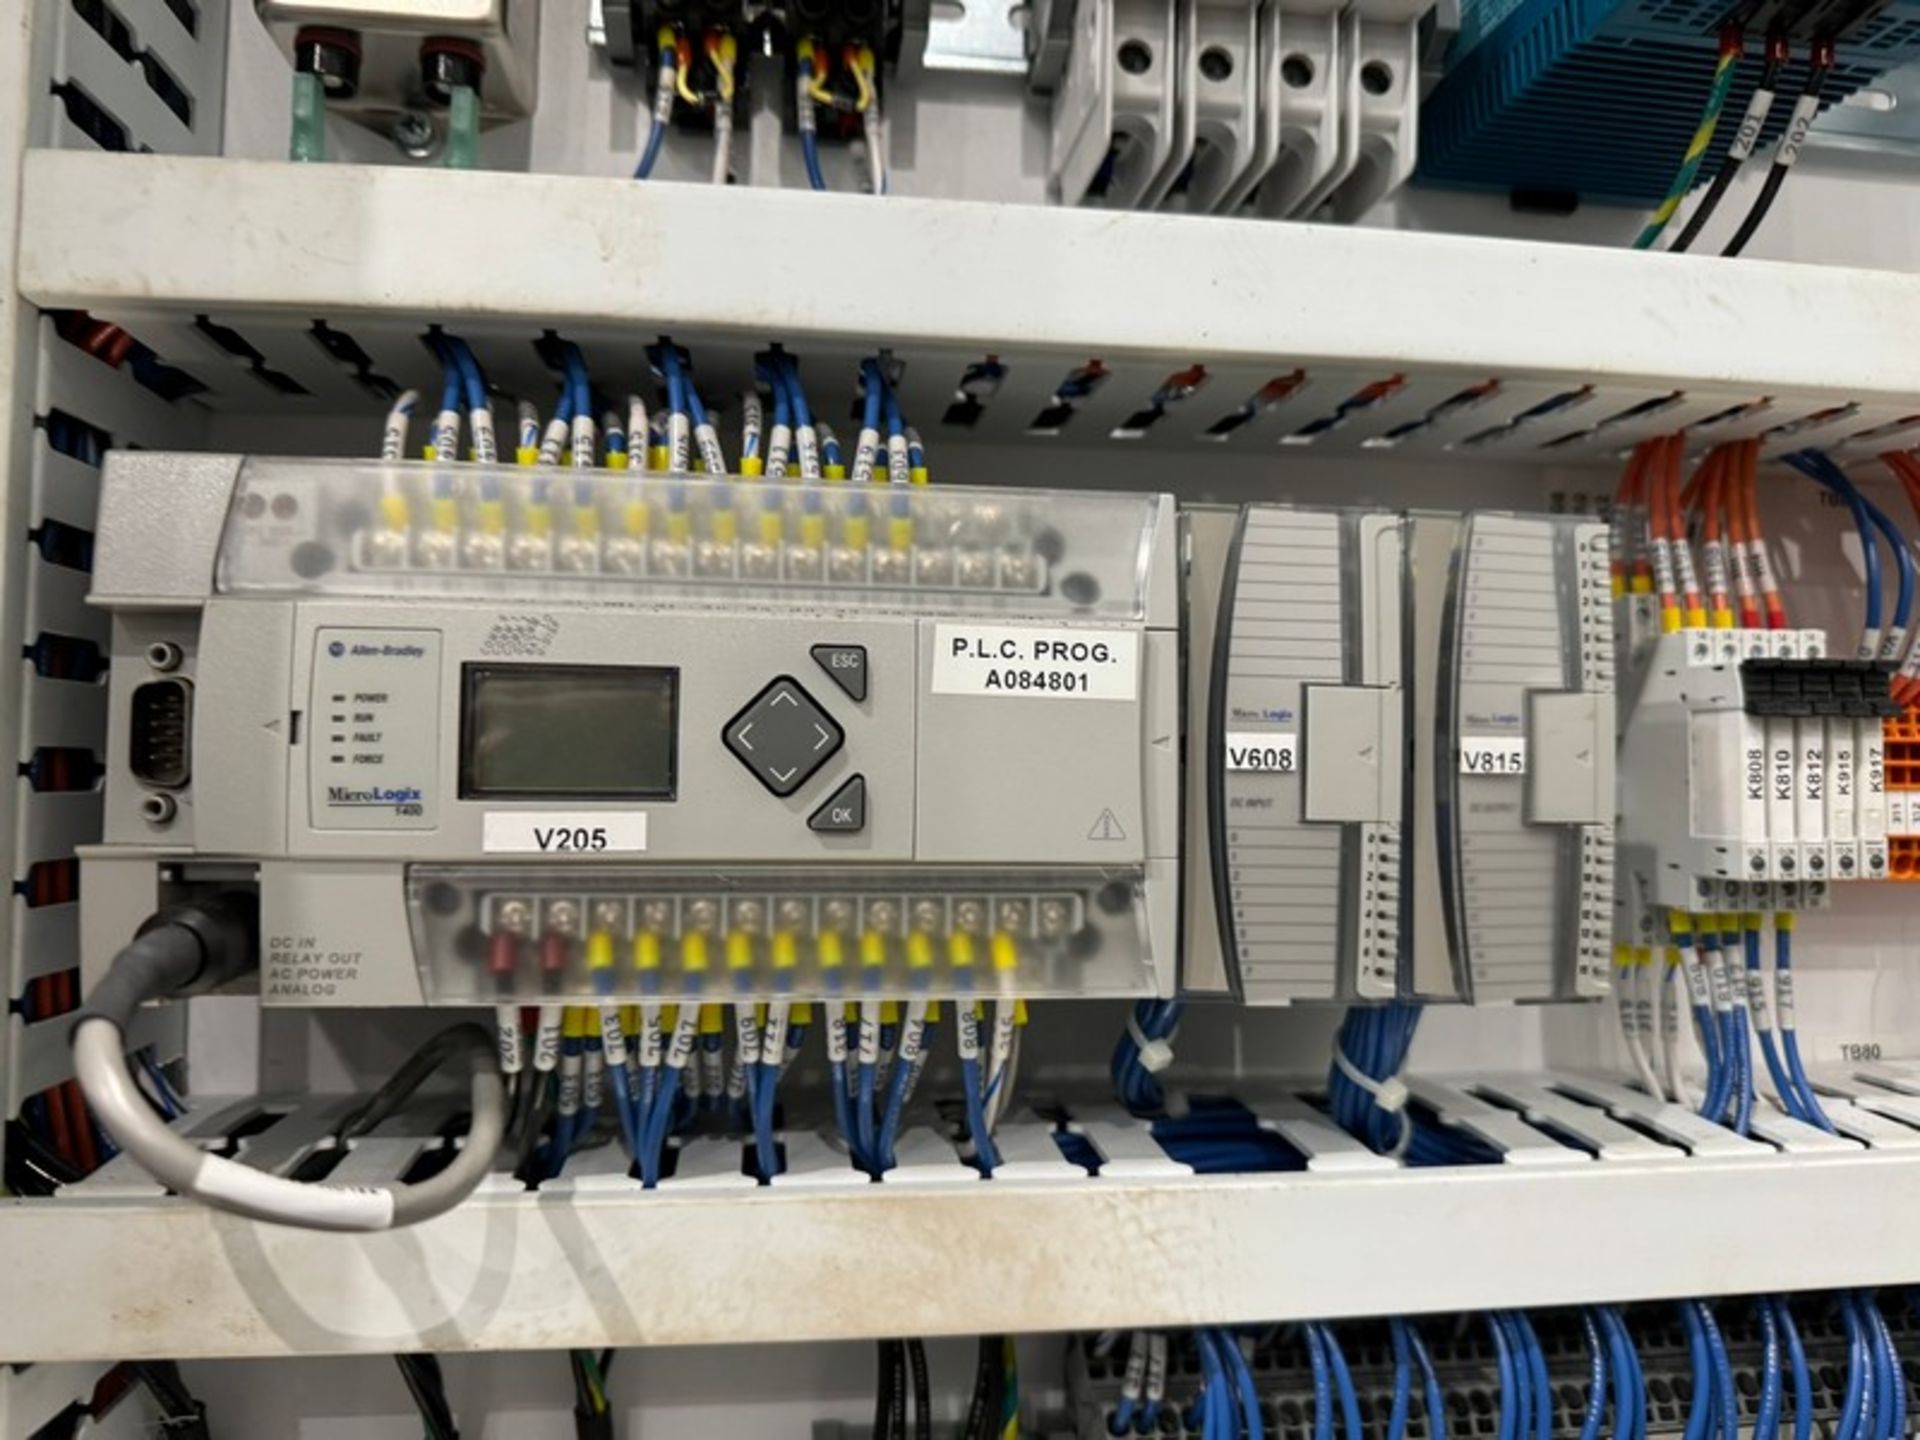 2019 Butler Automatic Inc. Splicer,M/N SP1-1924-4.5, S/N J-8381, 220 Volts, 1 Phase, S/S Control - Image 8 of 11